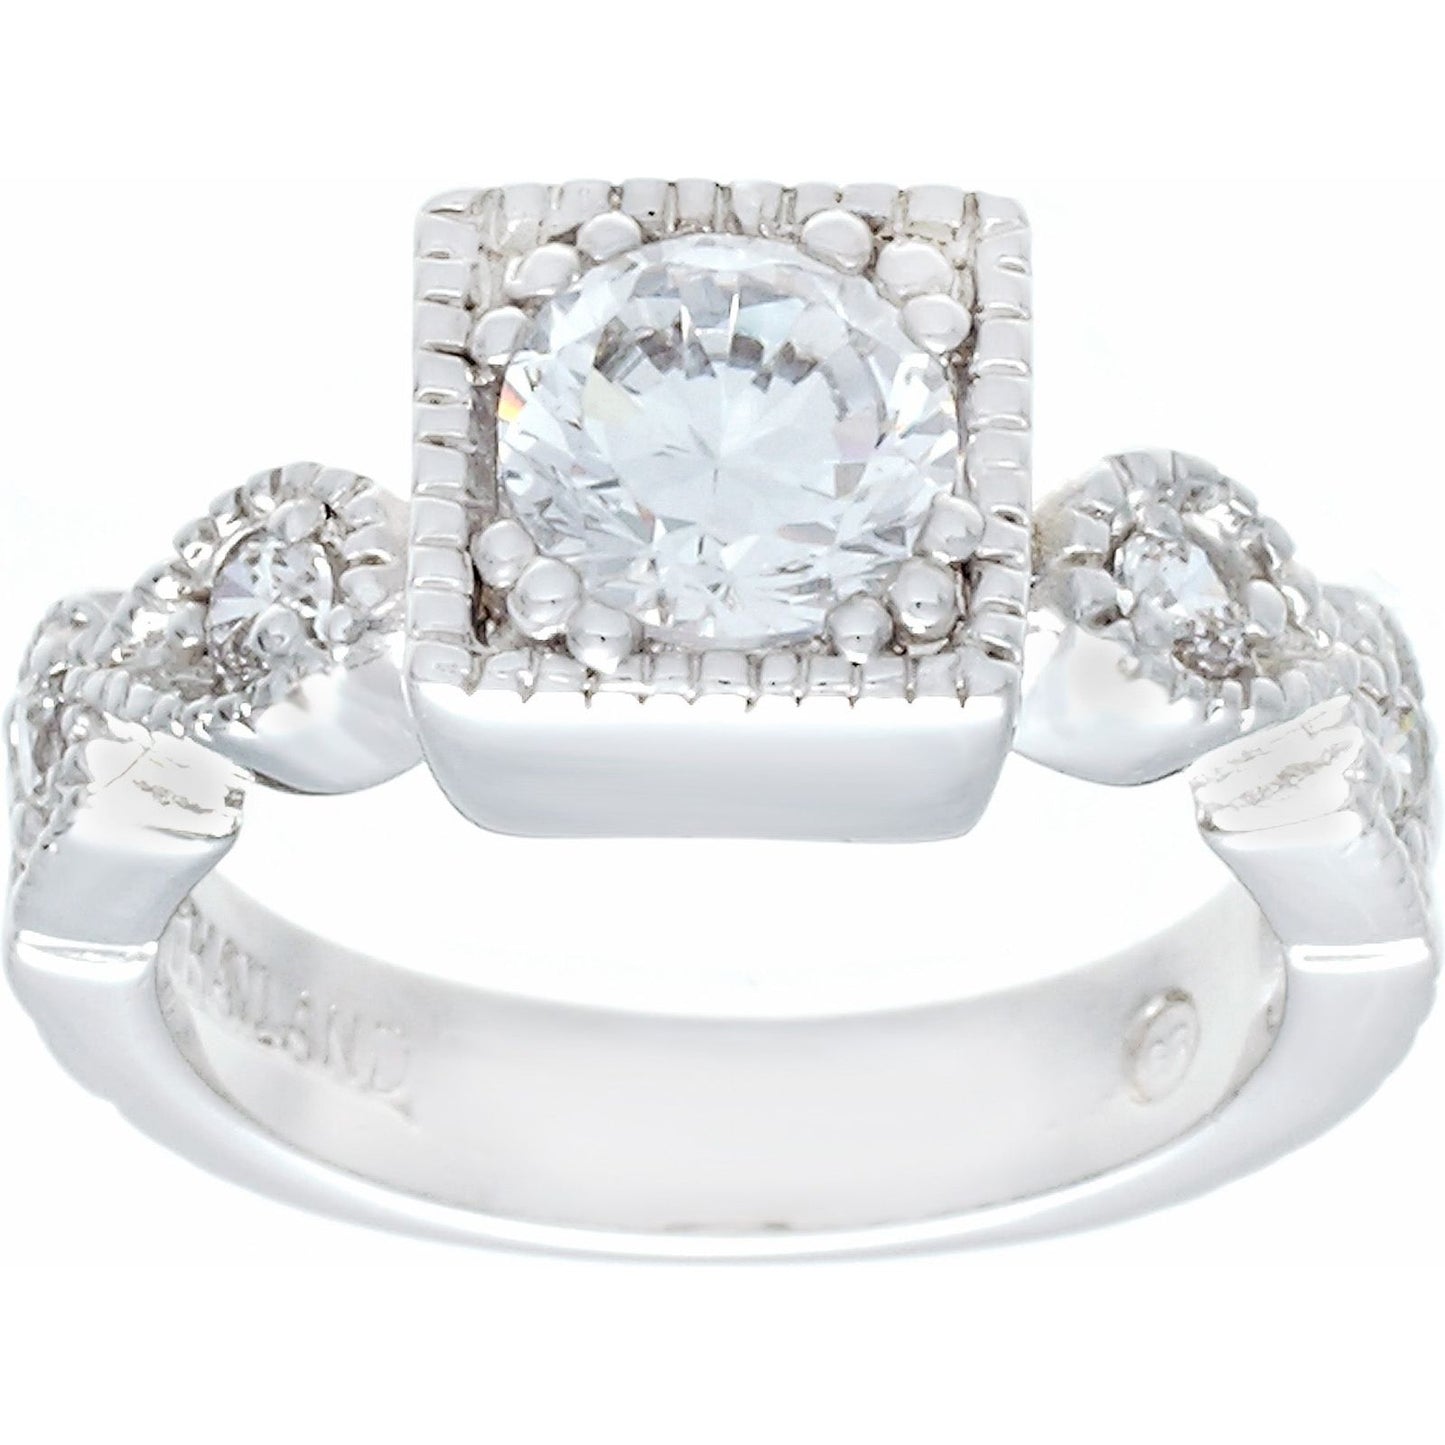 Designer Look Engagement Style Clear Stones Ring